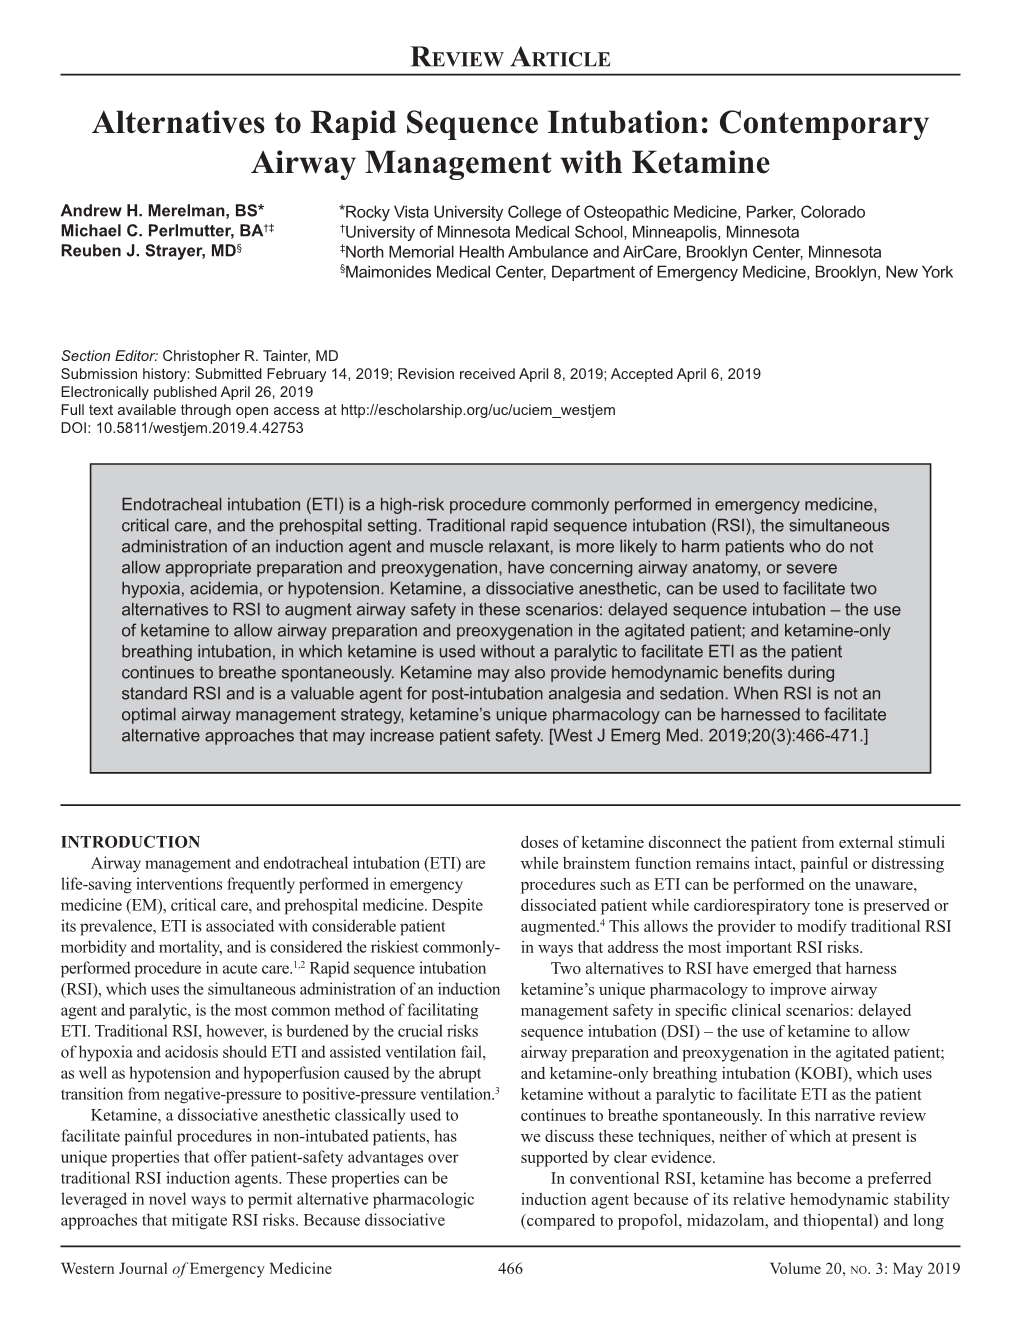 Alternatives to Rapid Sequence Intubation: Contemporary Airway Management with Ketamine